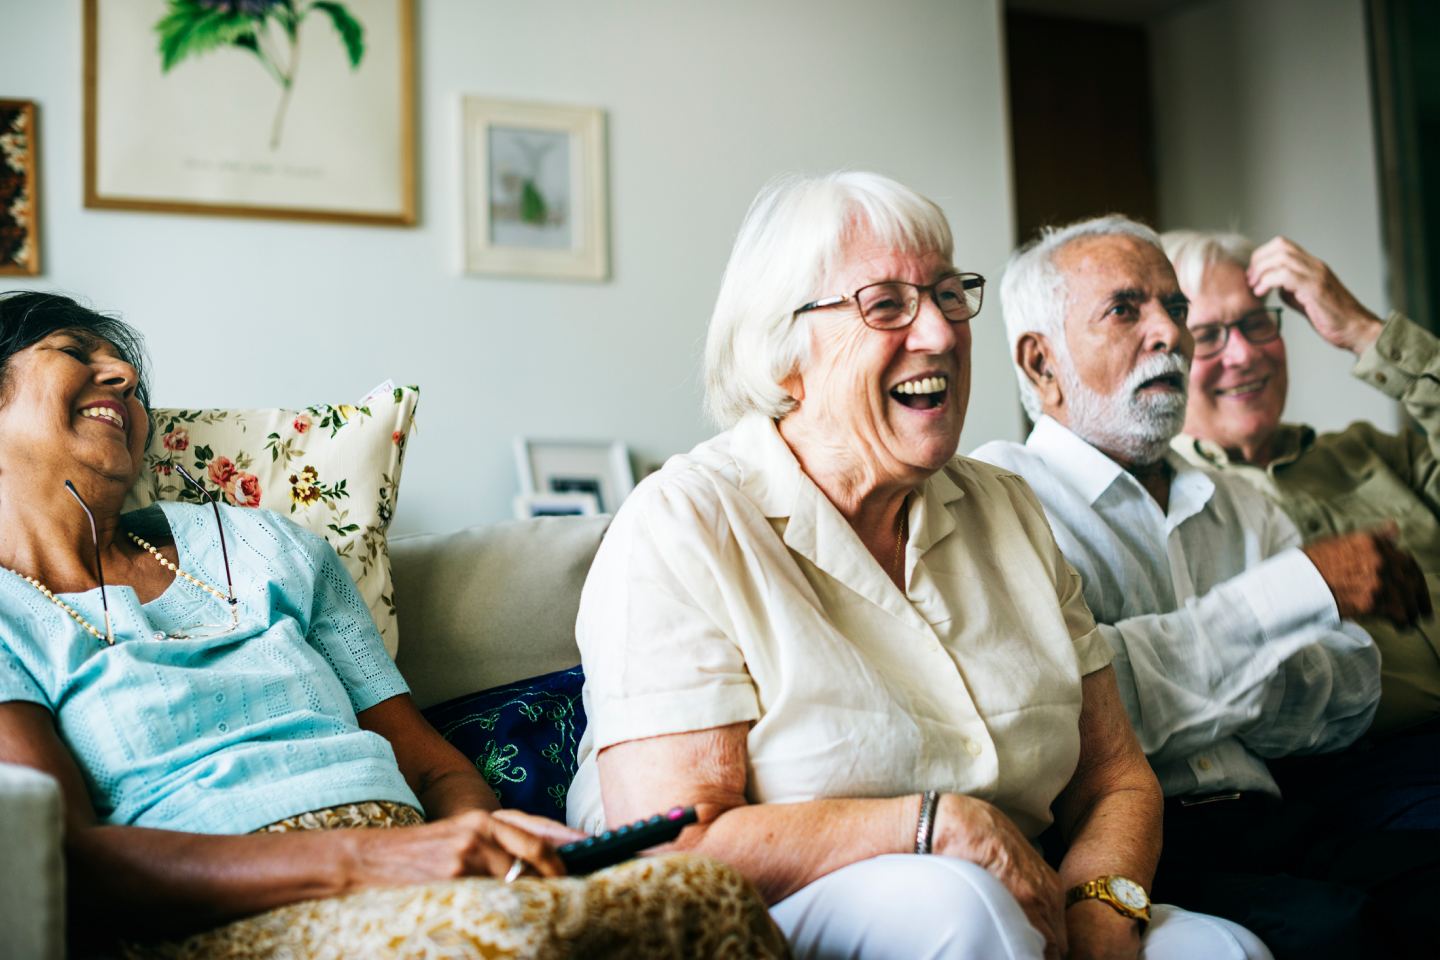 Group of retired people laughing on a couch